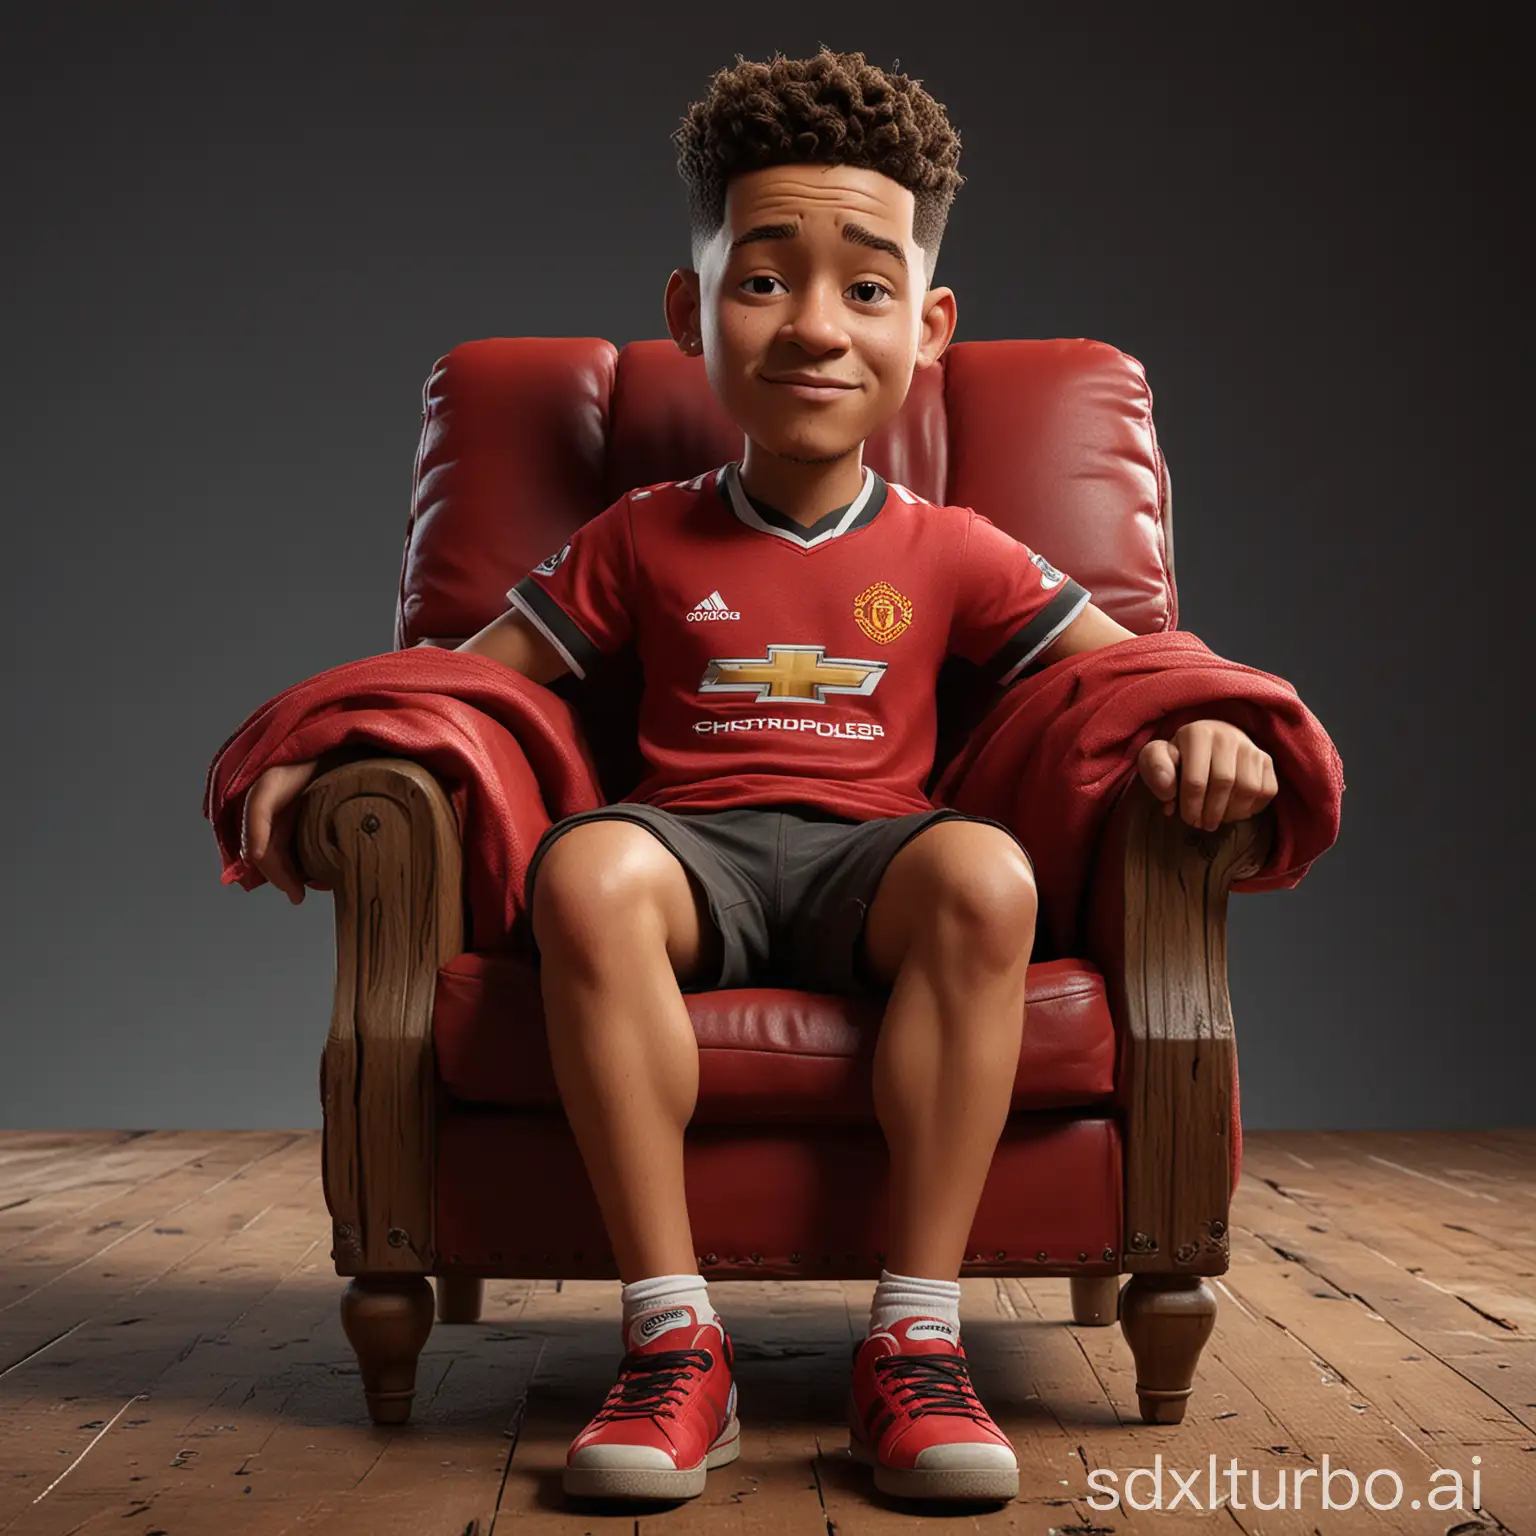 Create a realistic full body 3D Disney Pixar caricature with a large head. Jadon Sancho, is sitting relaxed in a sofa chair with a dark red wing back, the texture of the wood is clearly visible. Wearing a red t-shirt manchester united, wearing adidas shoes. The background should contrast with the color of the chairs and clothes, thereby enhancing the overall composition of the picture. Use soft photographic lighting, dramatic overhead lighting, very high image quality, clear character details, UHD, 16k.